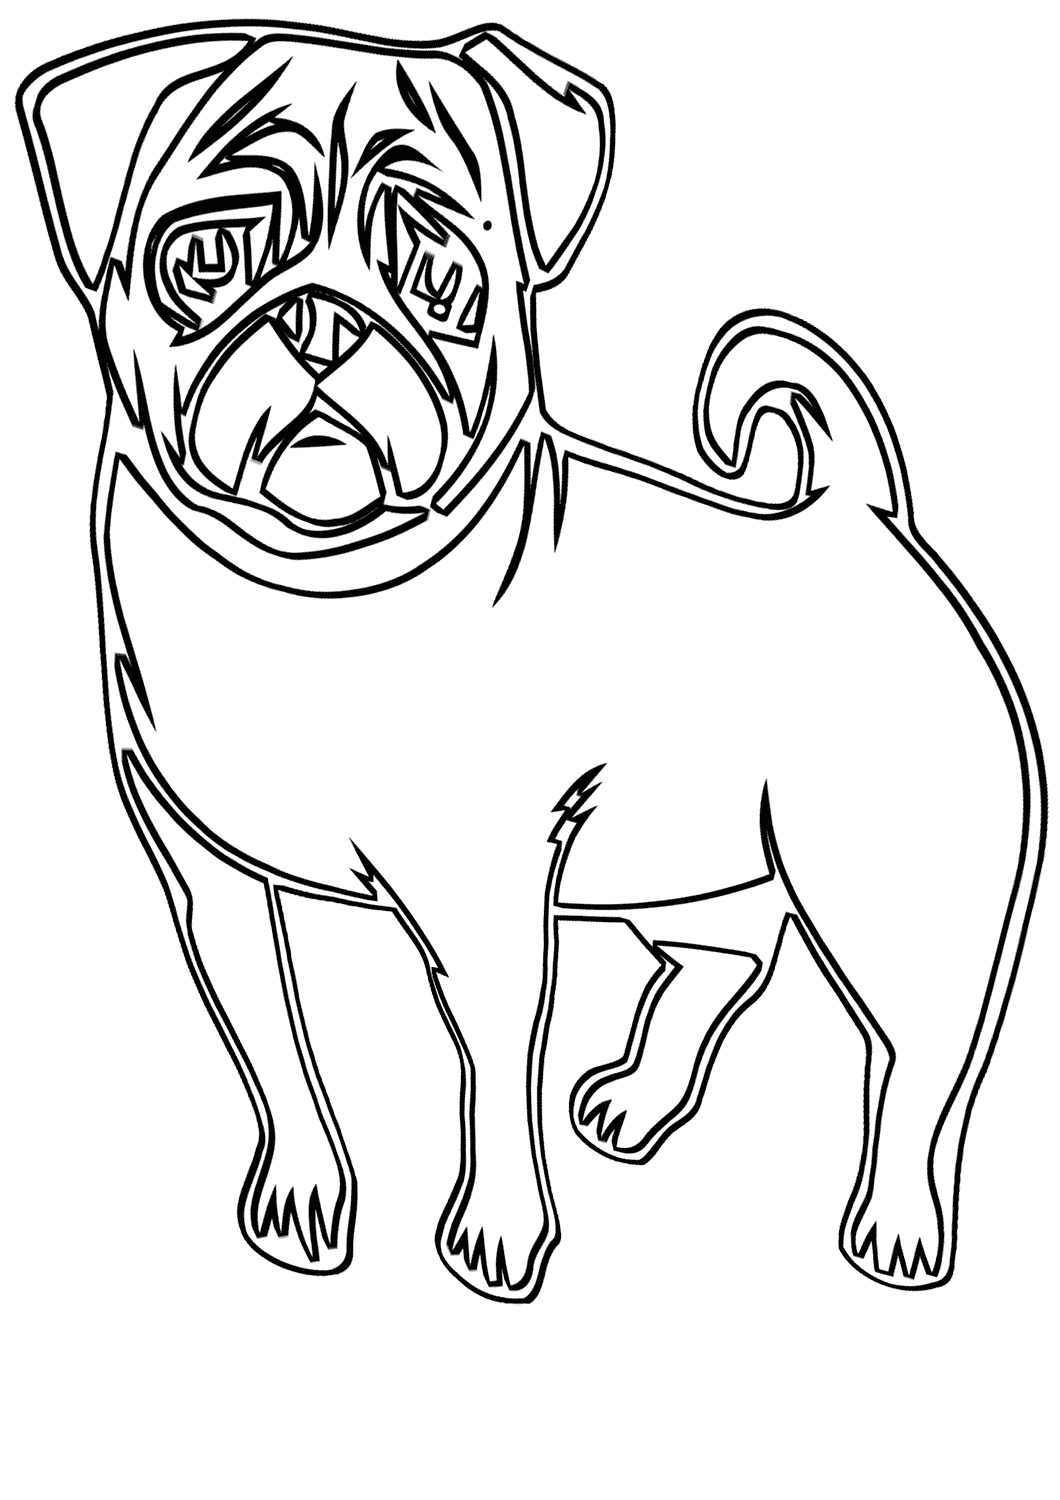 Pug Coloring Pages to download and print for free